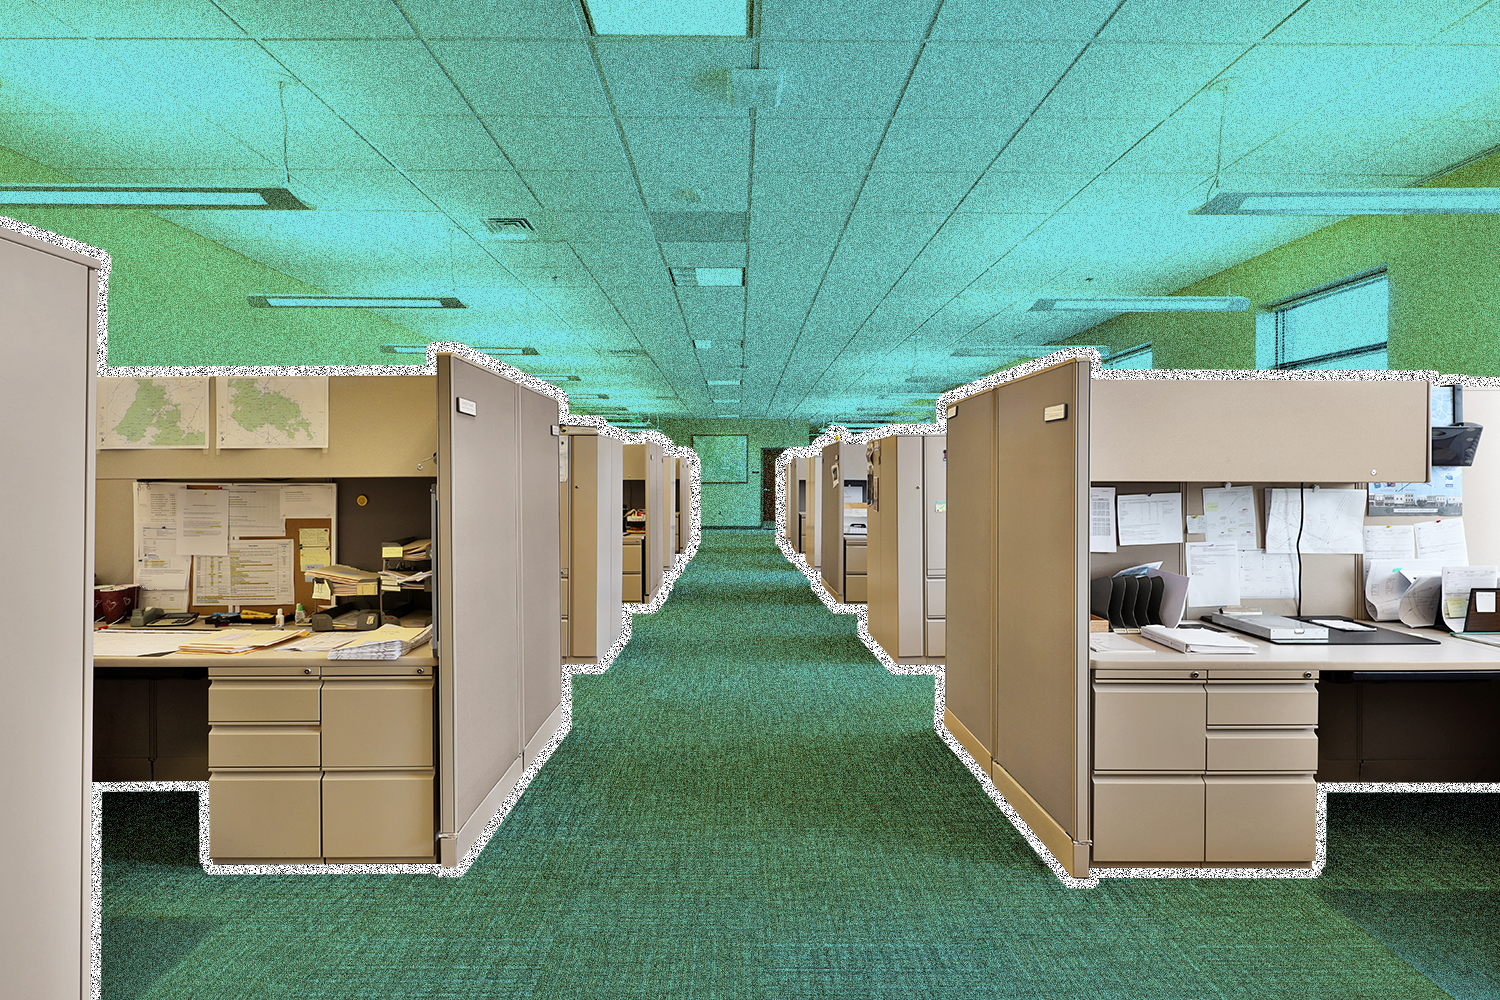 Empty beige office cubicles with an aqua overlay